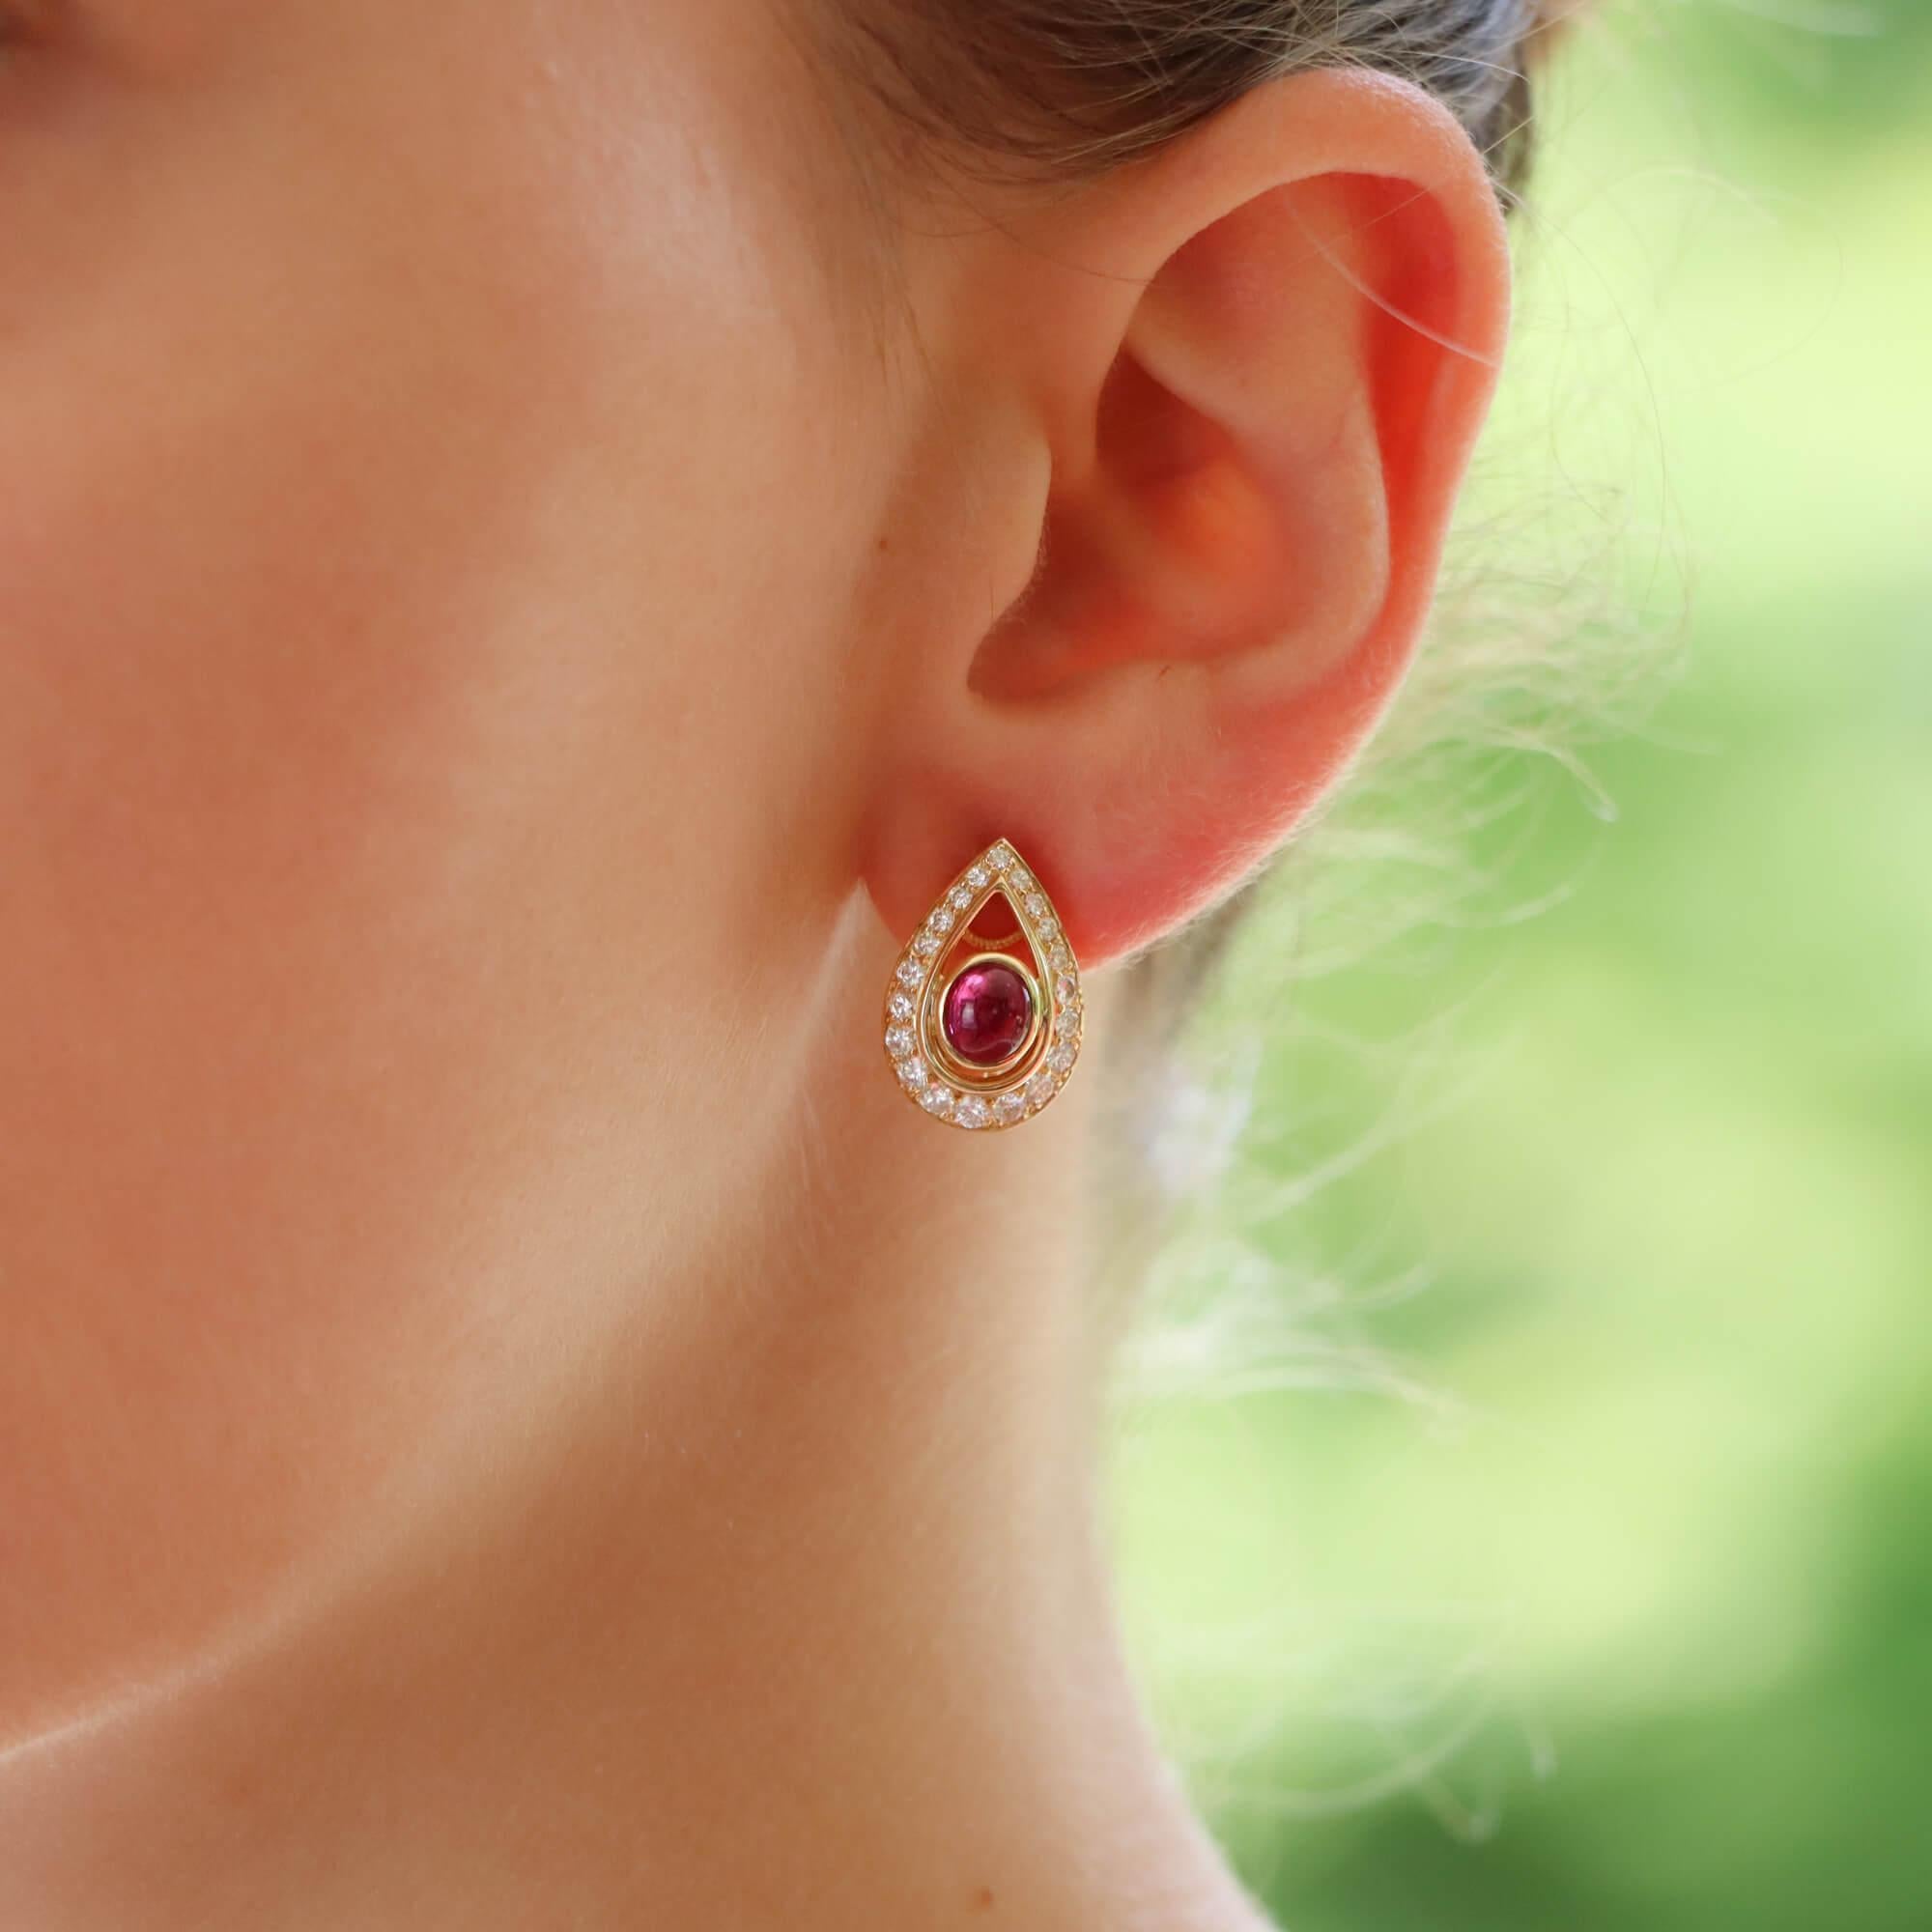  A fabulous pair of vintage Cartier diamond and cabochon ruby teardrop earrings set in 18k yellow gold. 

Each earring is set with a round cabochon ruby stone which is securely rub over set to the center of a teardrop motif. This teardrop motif is